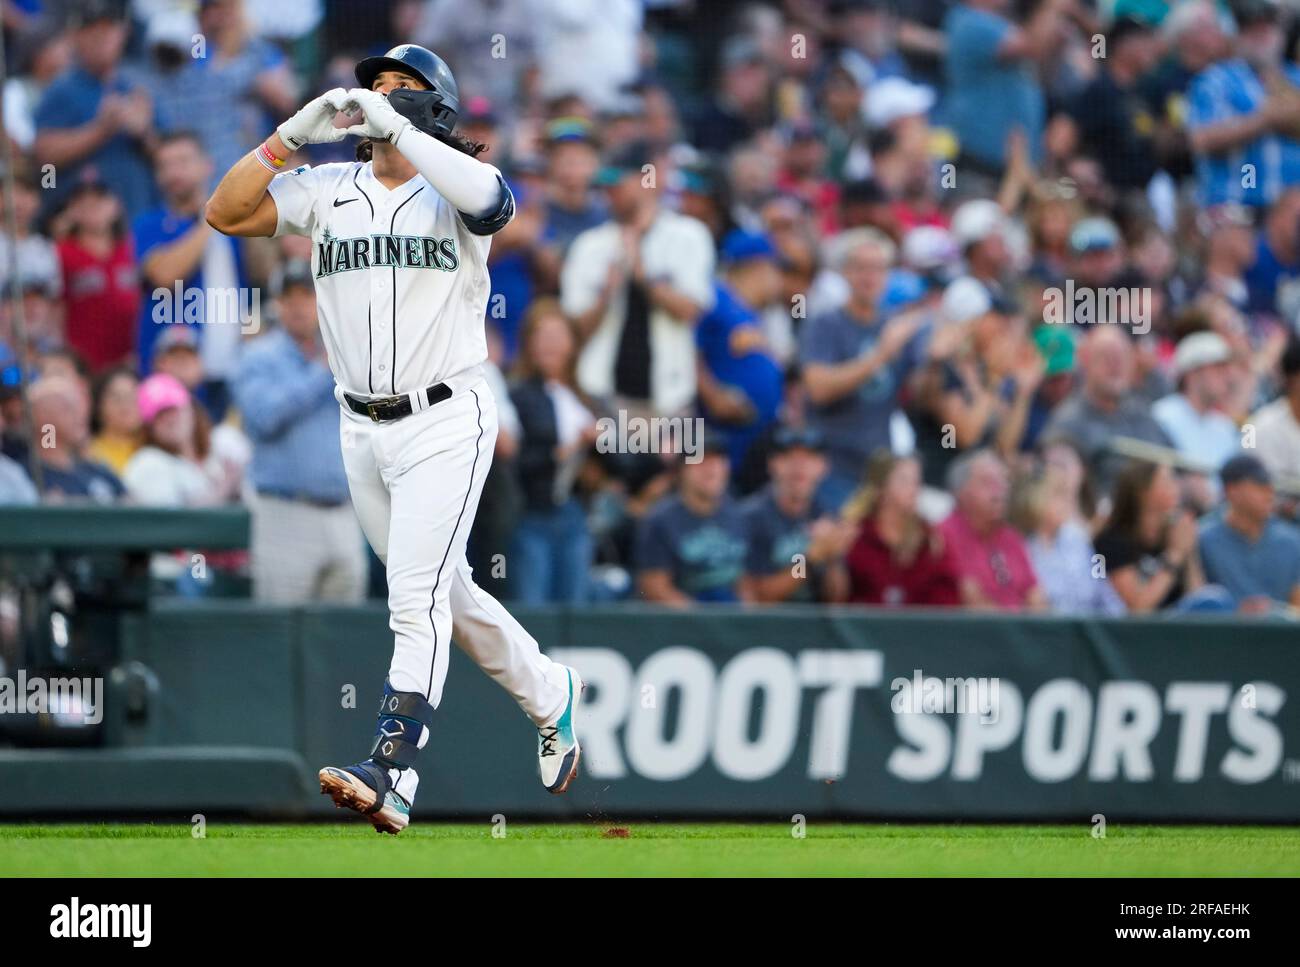 Seattle Mariners' Eugenio Suarez makes a heart as he rounds the